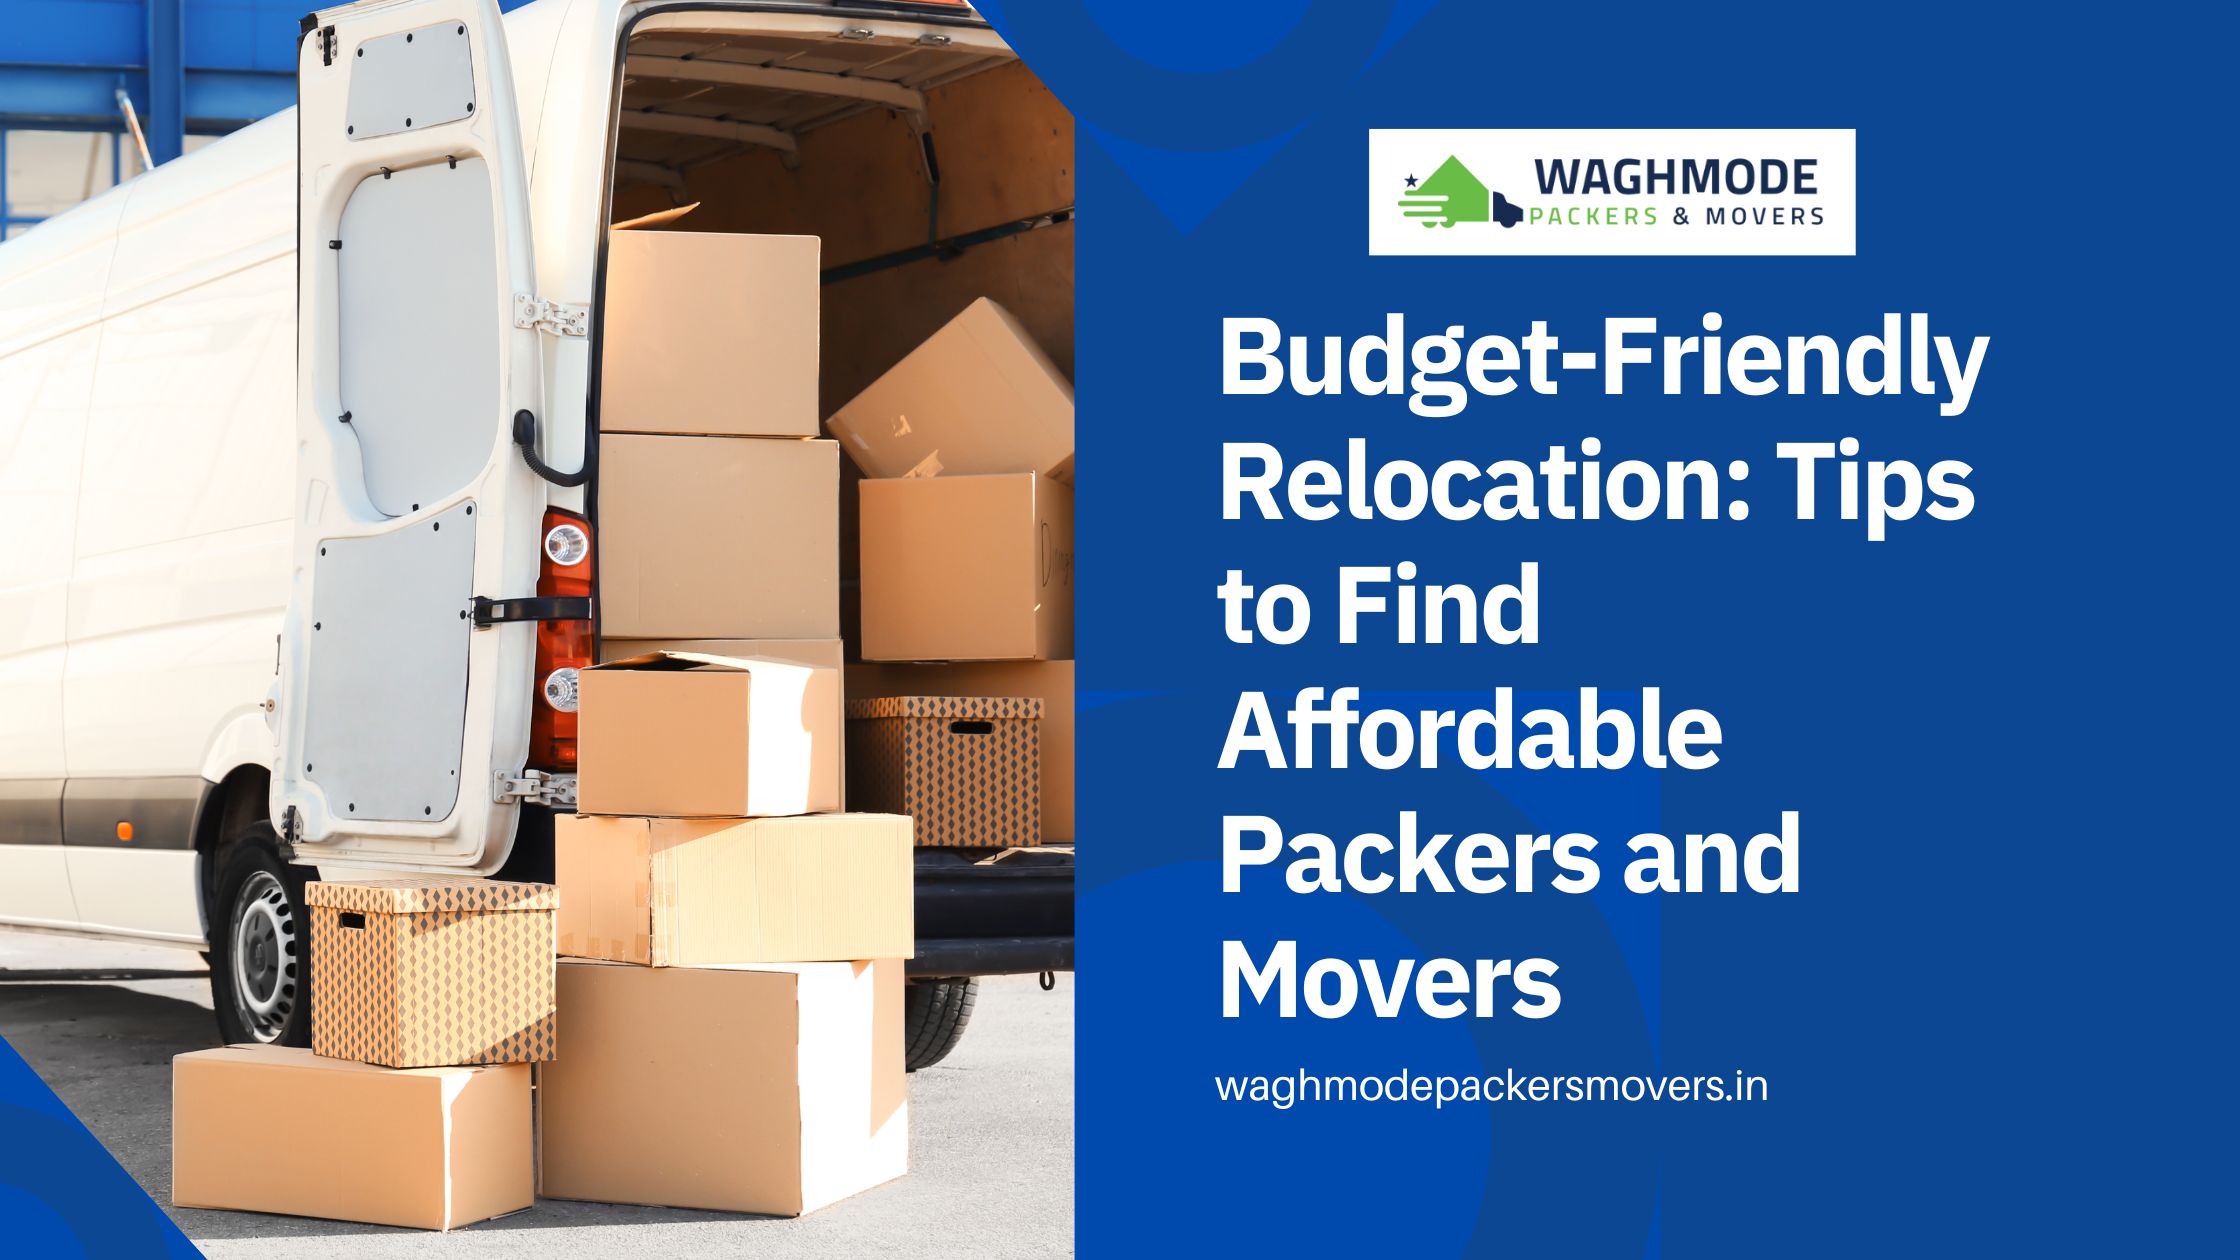 Budget-Friendly Relocation: Tips to Find Affordable Packers and Movers